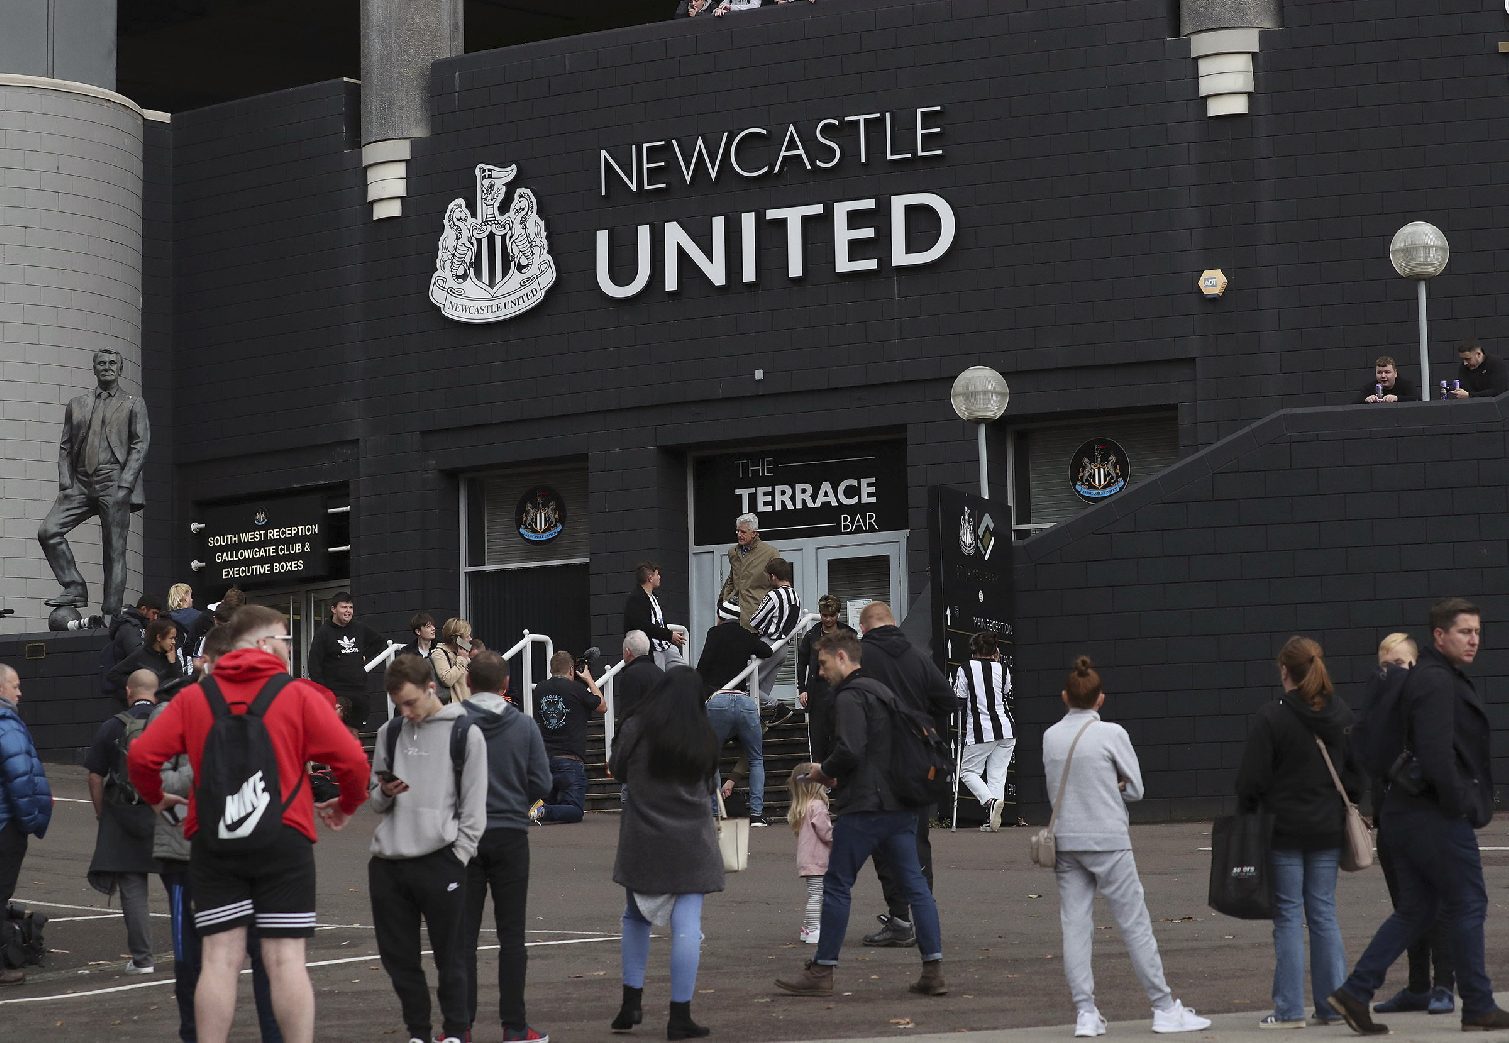 English clubs were upset with the wealthy Saudi owner of Newcastle